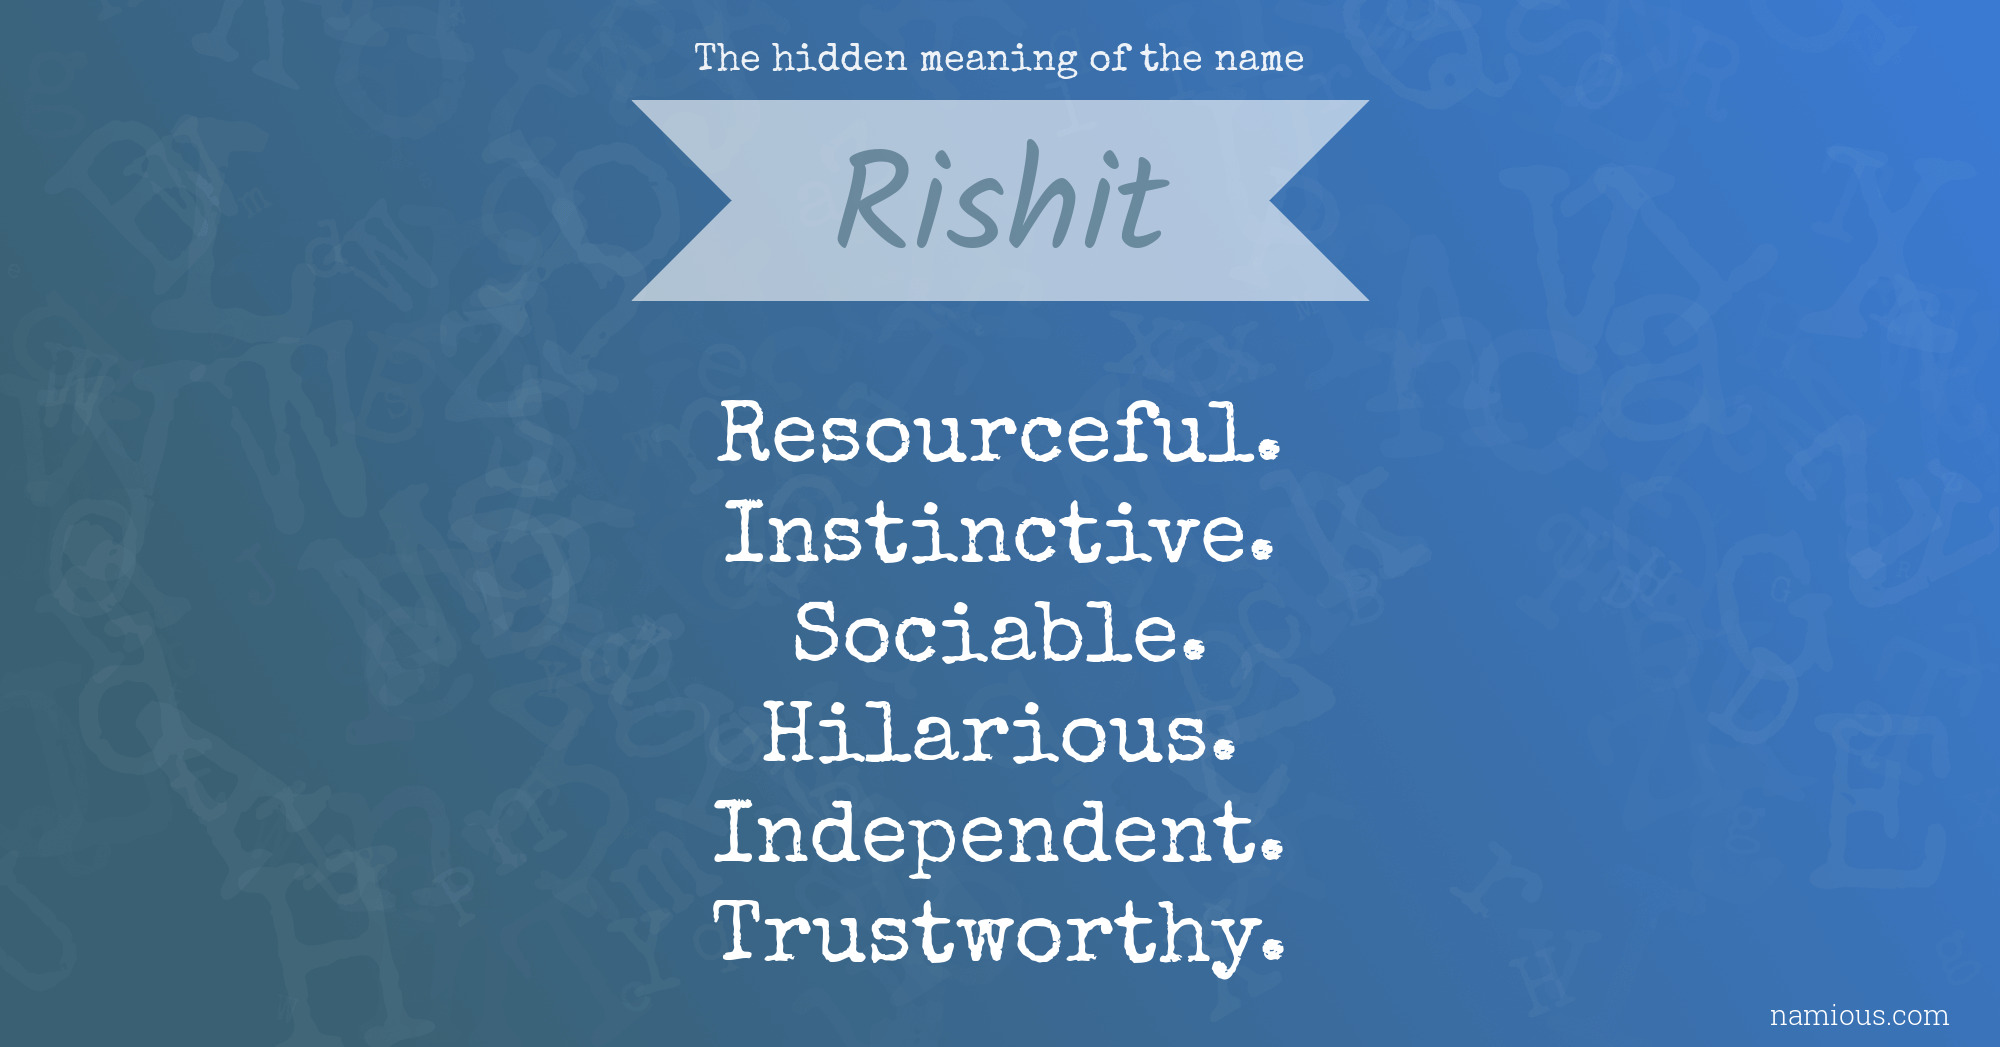 The hidden meaning of the name Rishit